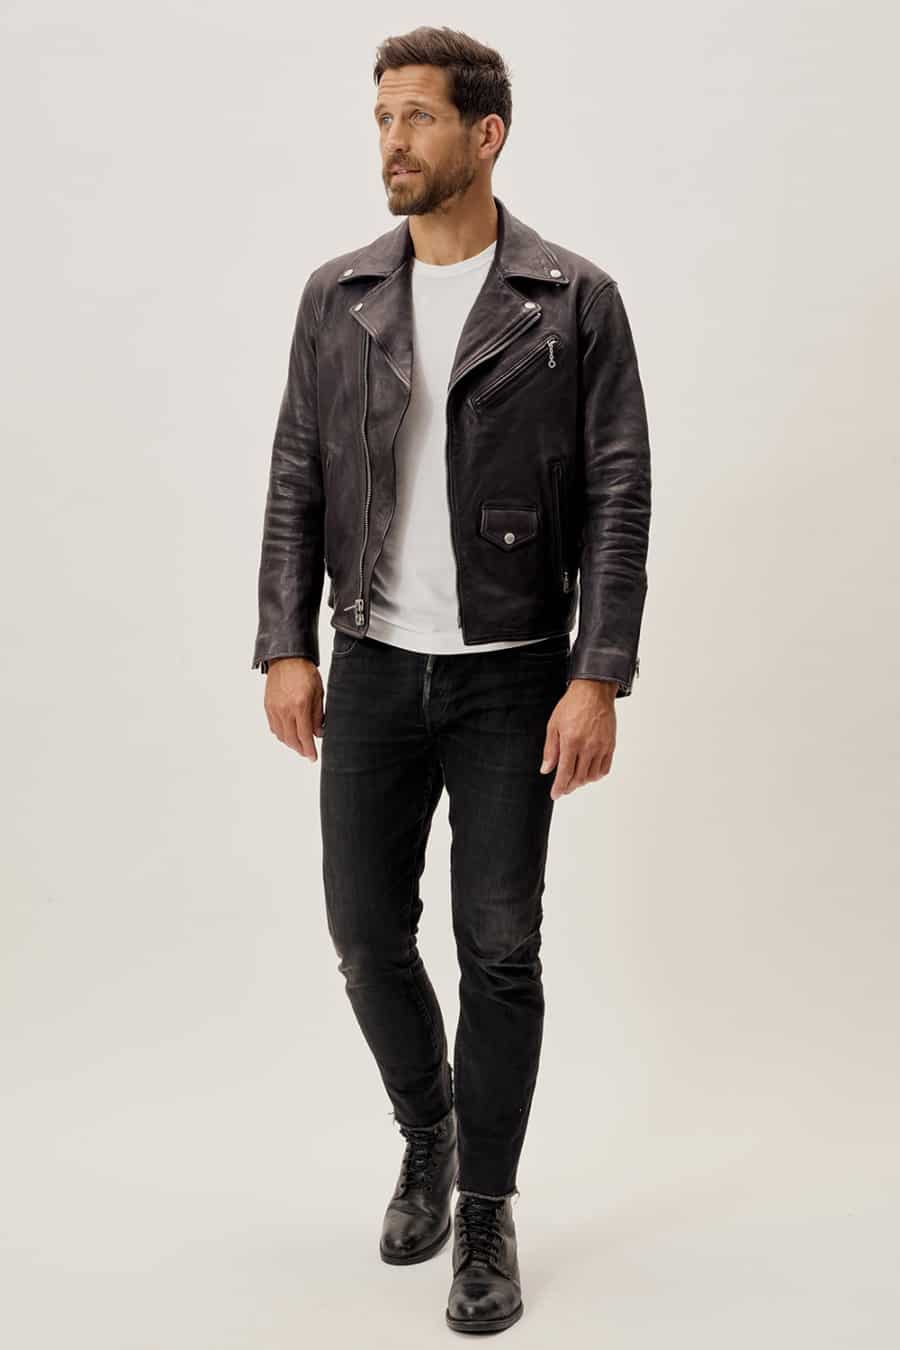 Men's black jeans, black boots, white T-shirt and black leather jacket outfit